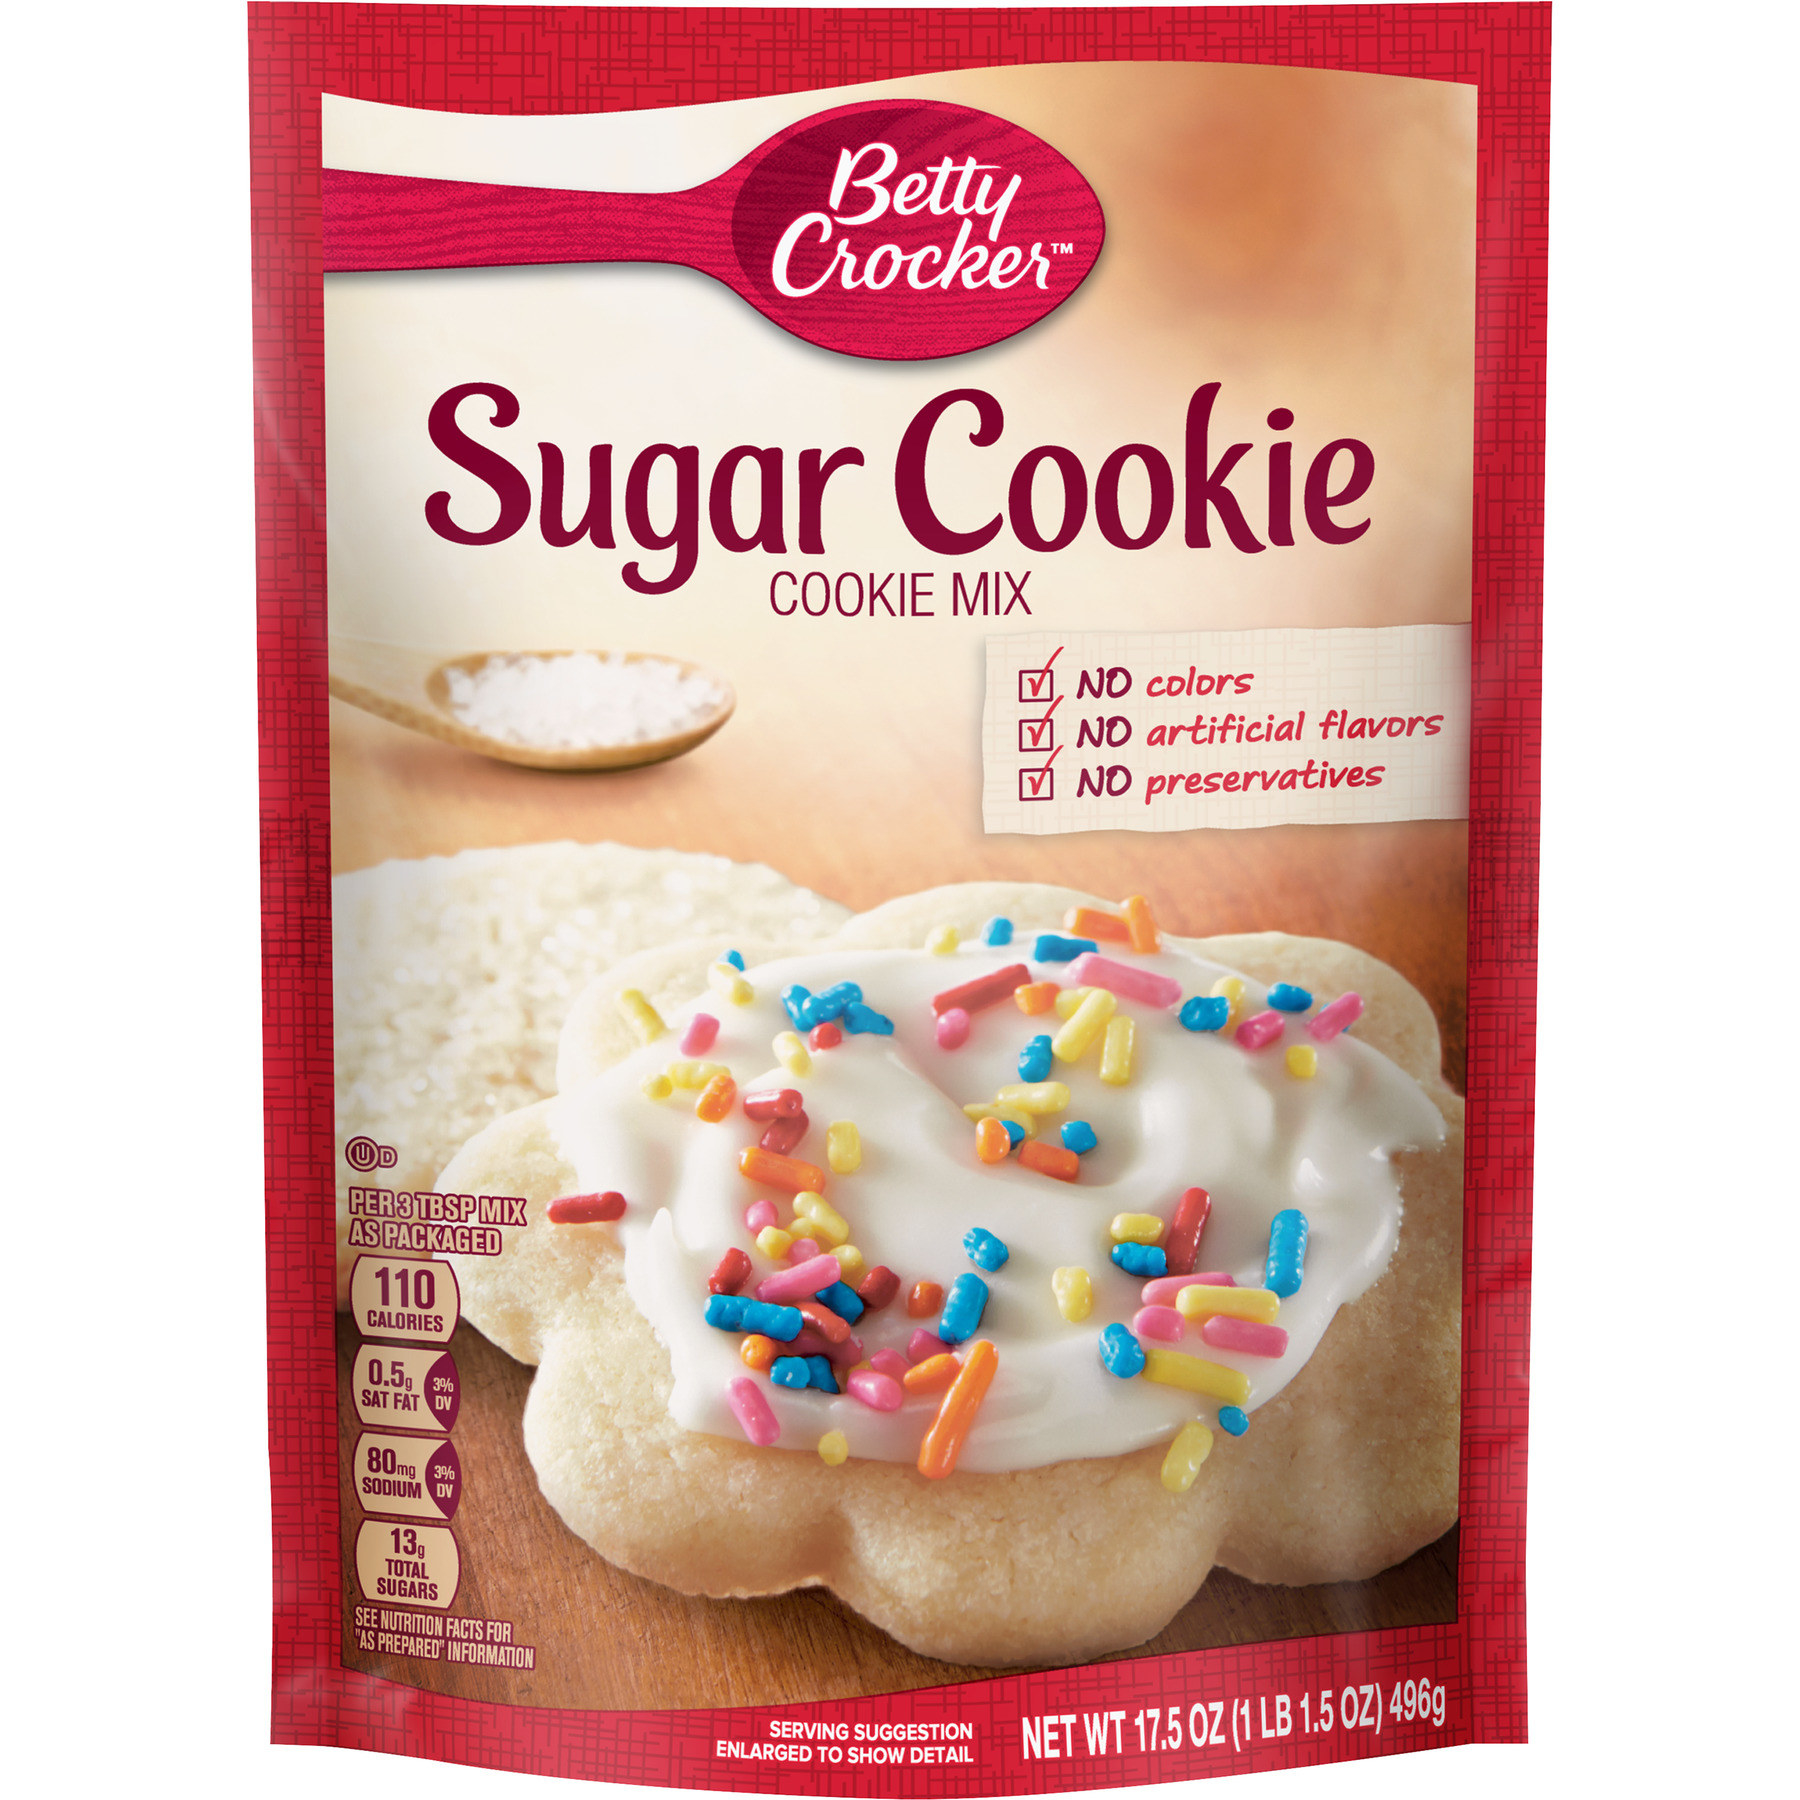 a package of sugar cookie mix